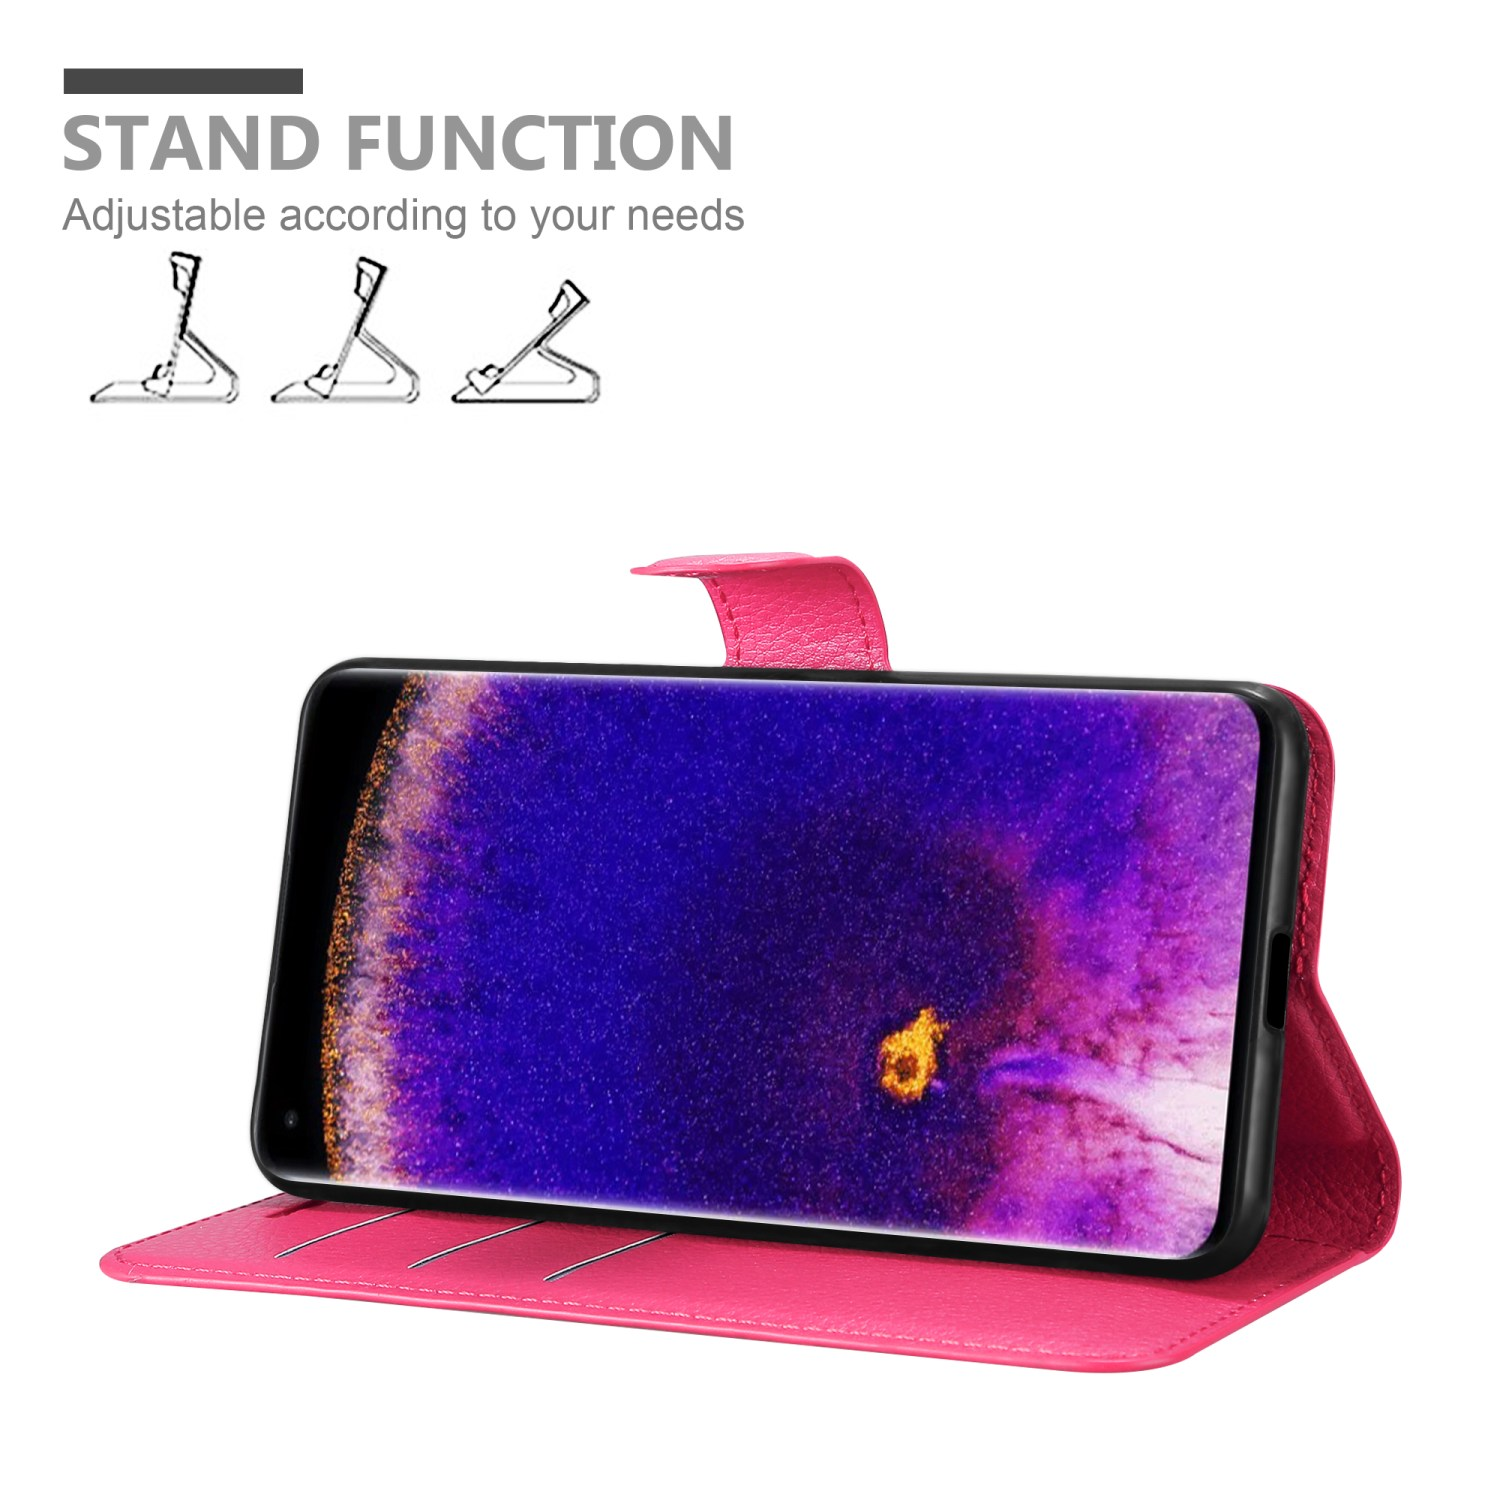 Bookcover, Hülle Book PRO, Oppo, PINK X5 FIND CHERRY Standfunktion, CADORABO